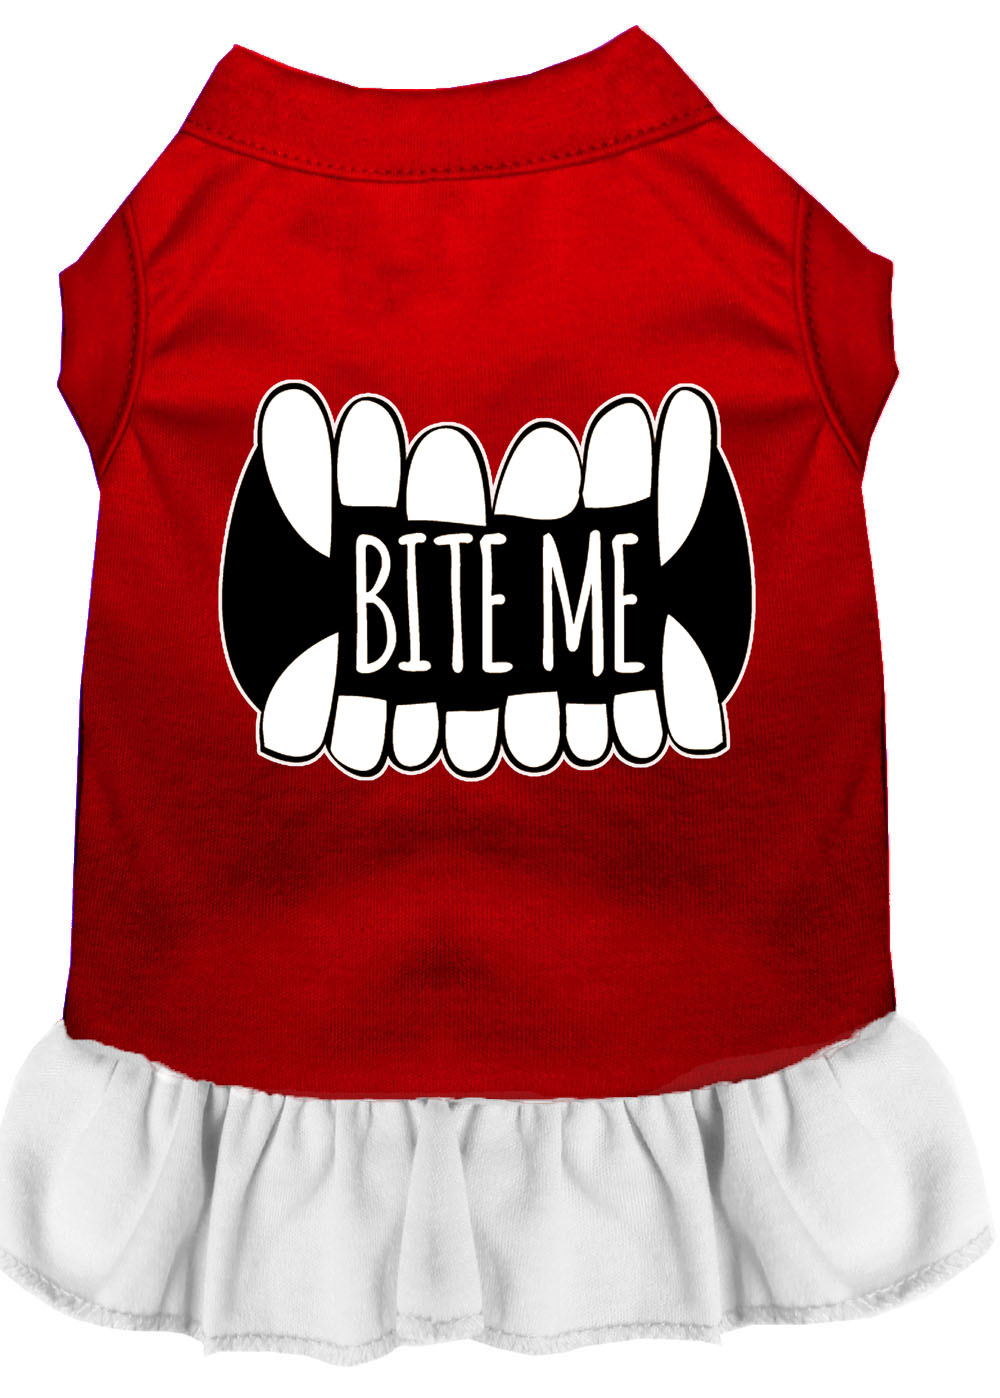 Bite Me Screen Print Dog Dress Red with White Sm